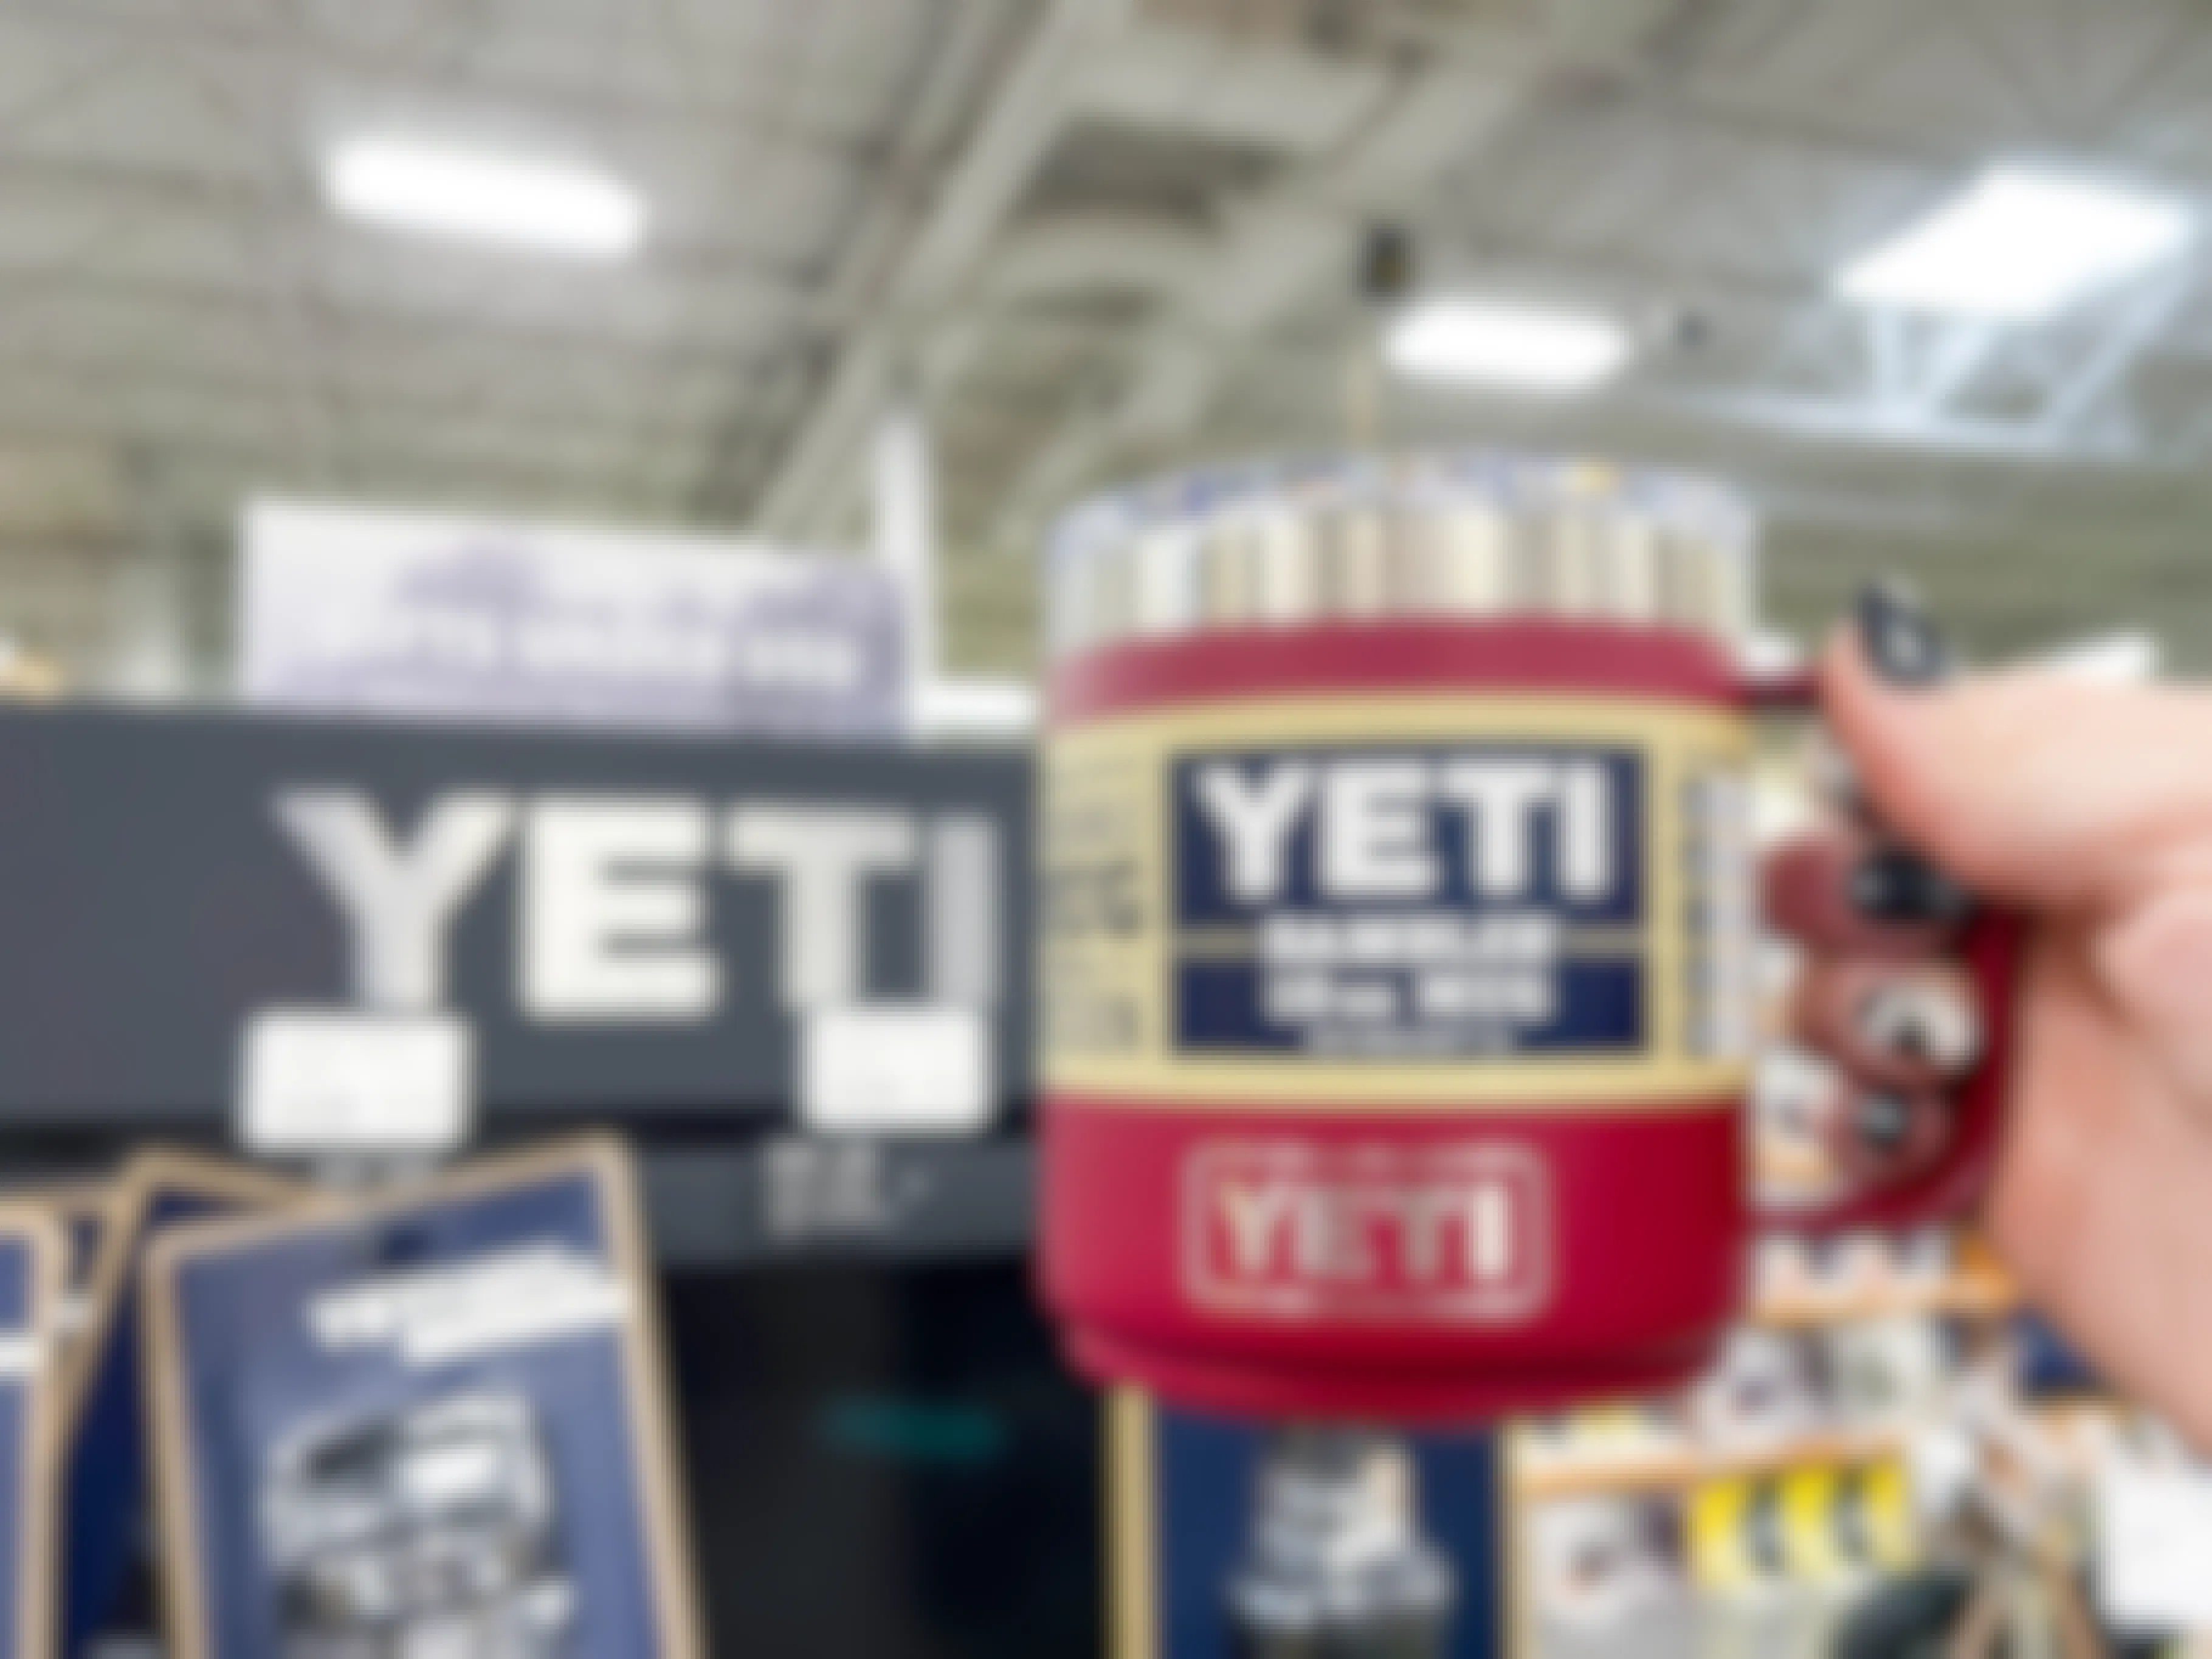 A person's hand holding a Yeti Rambler mug next to a Yeti display inside a store.